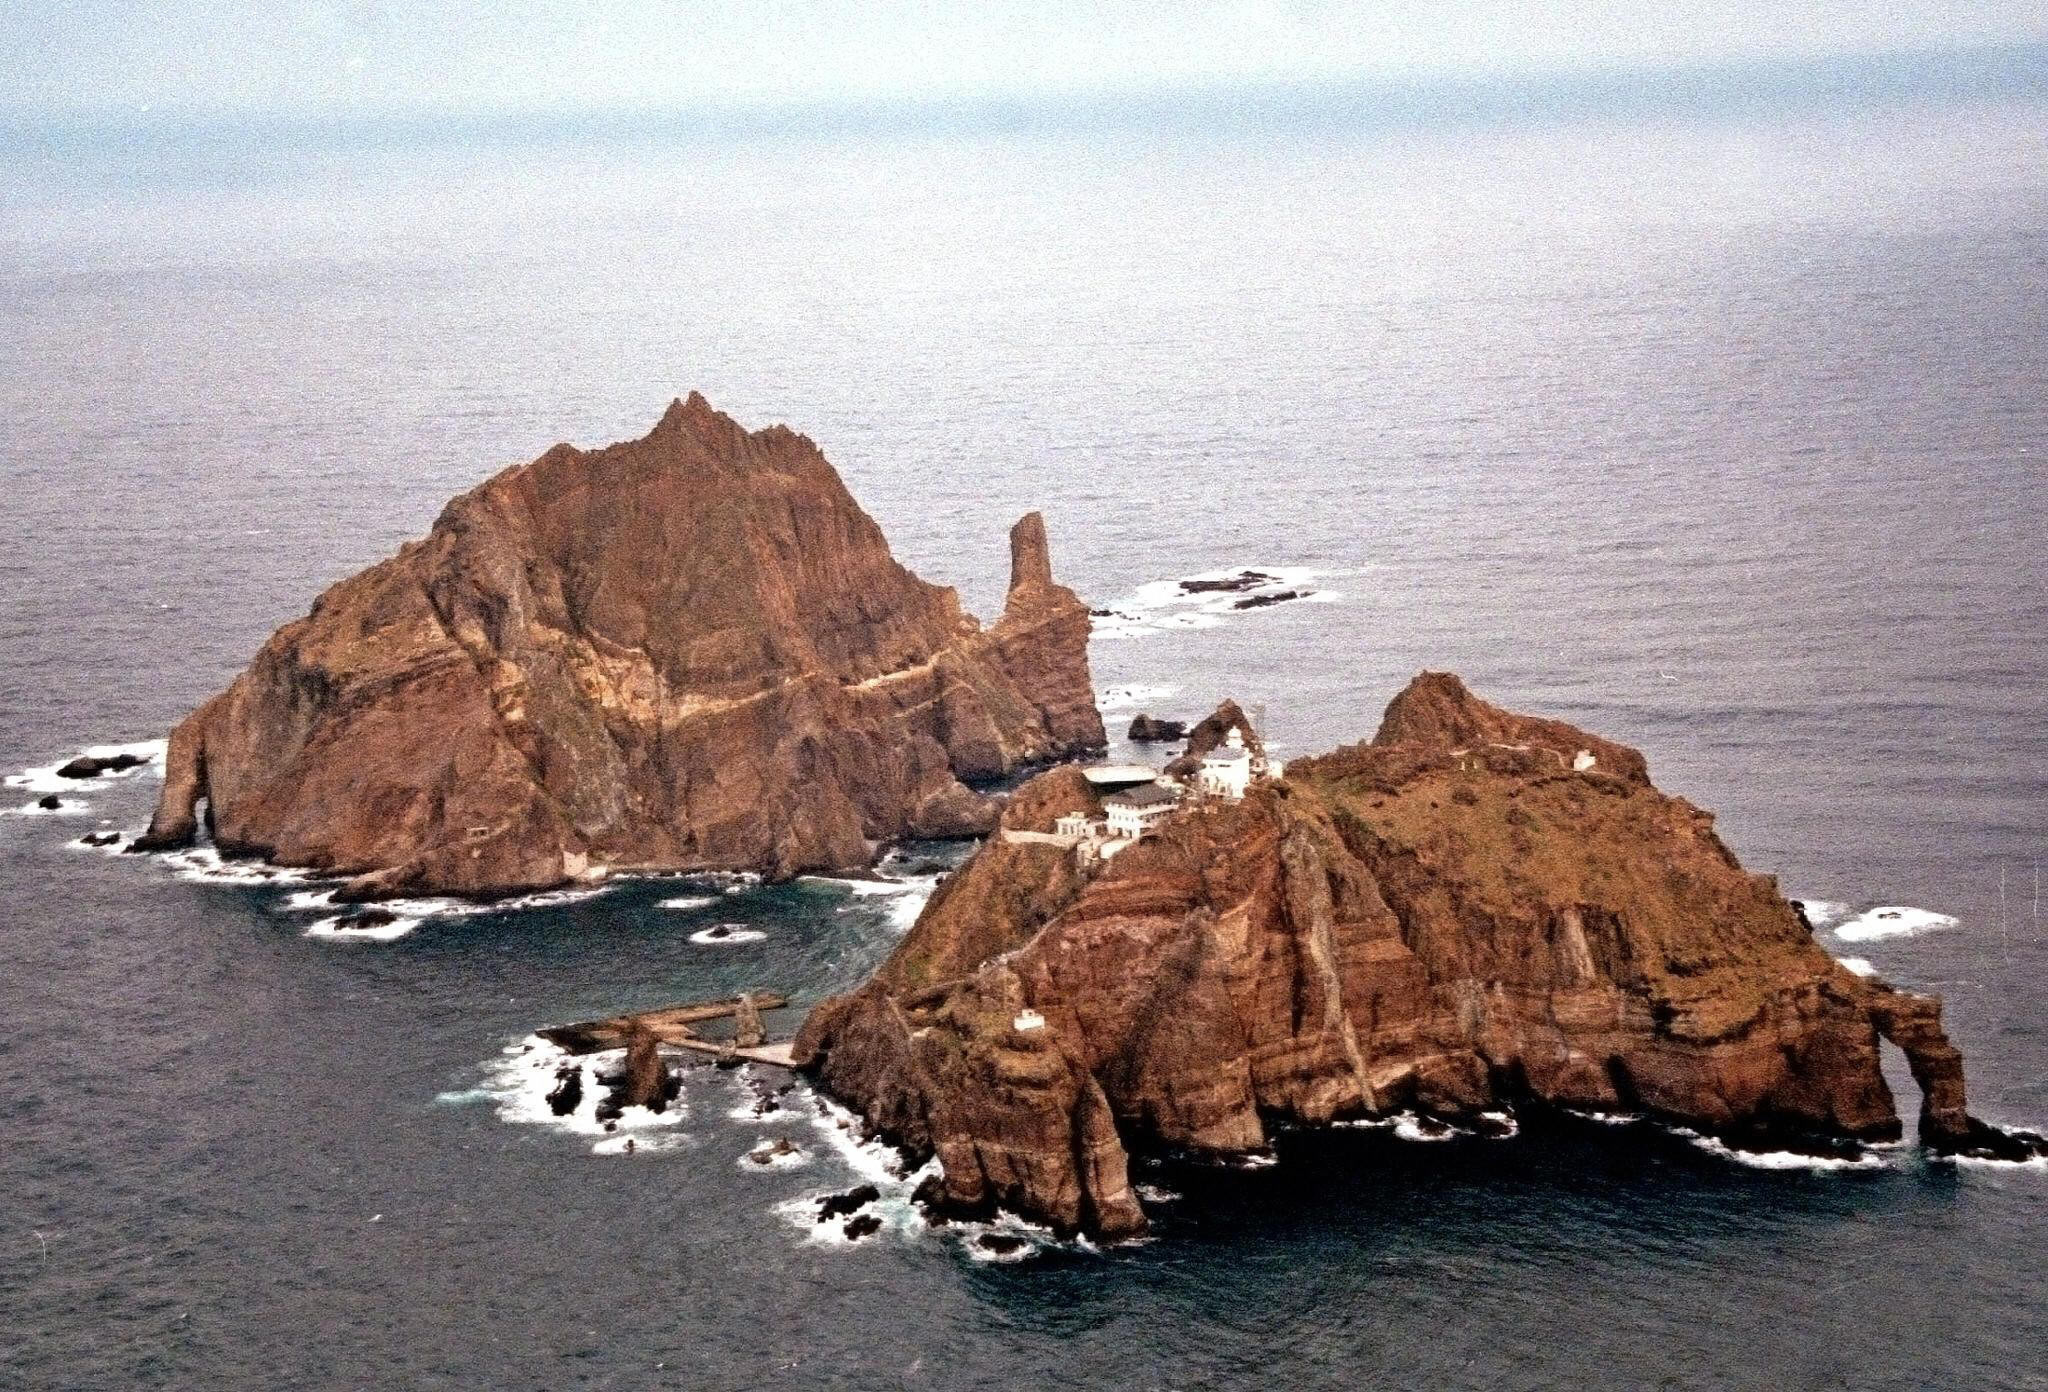 The Dokdo islands are a source of diplomatic tension between South Korea and Japan ©Getty Images